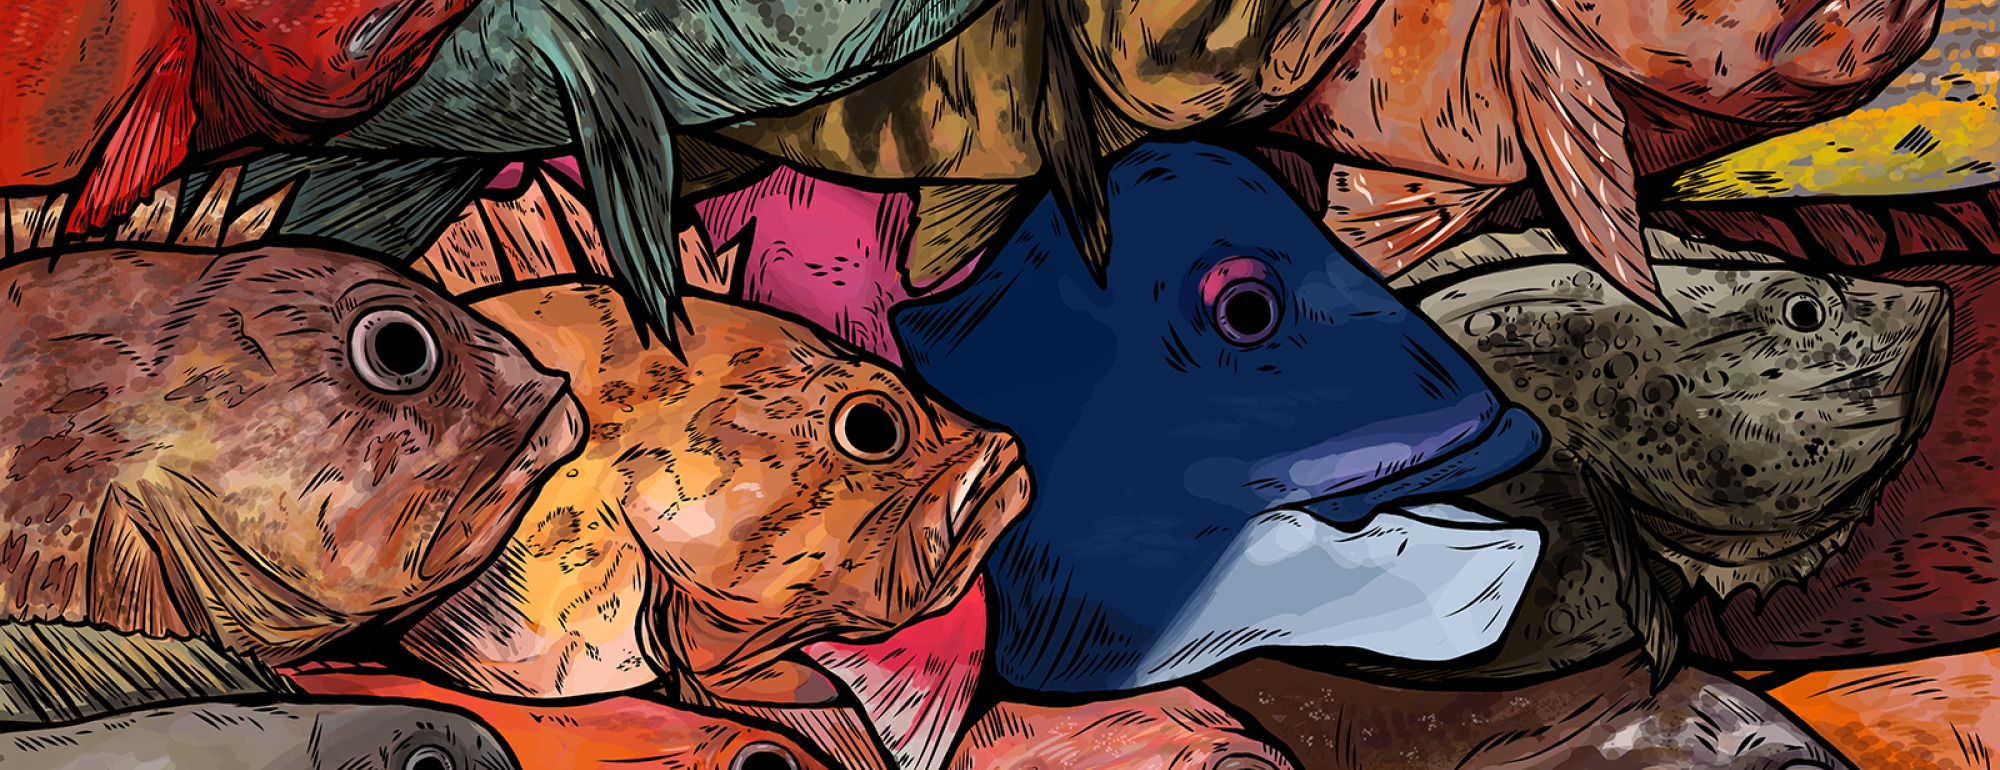 An illustration showing many types of rockfish layered together